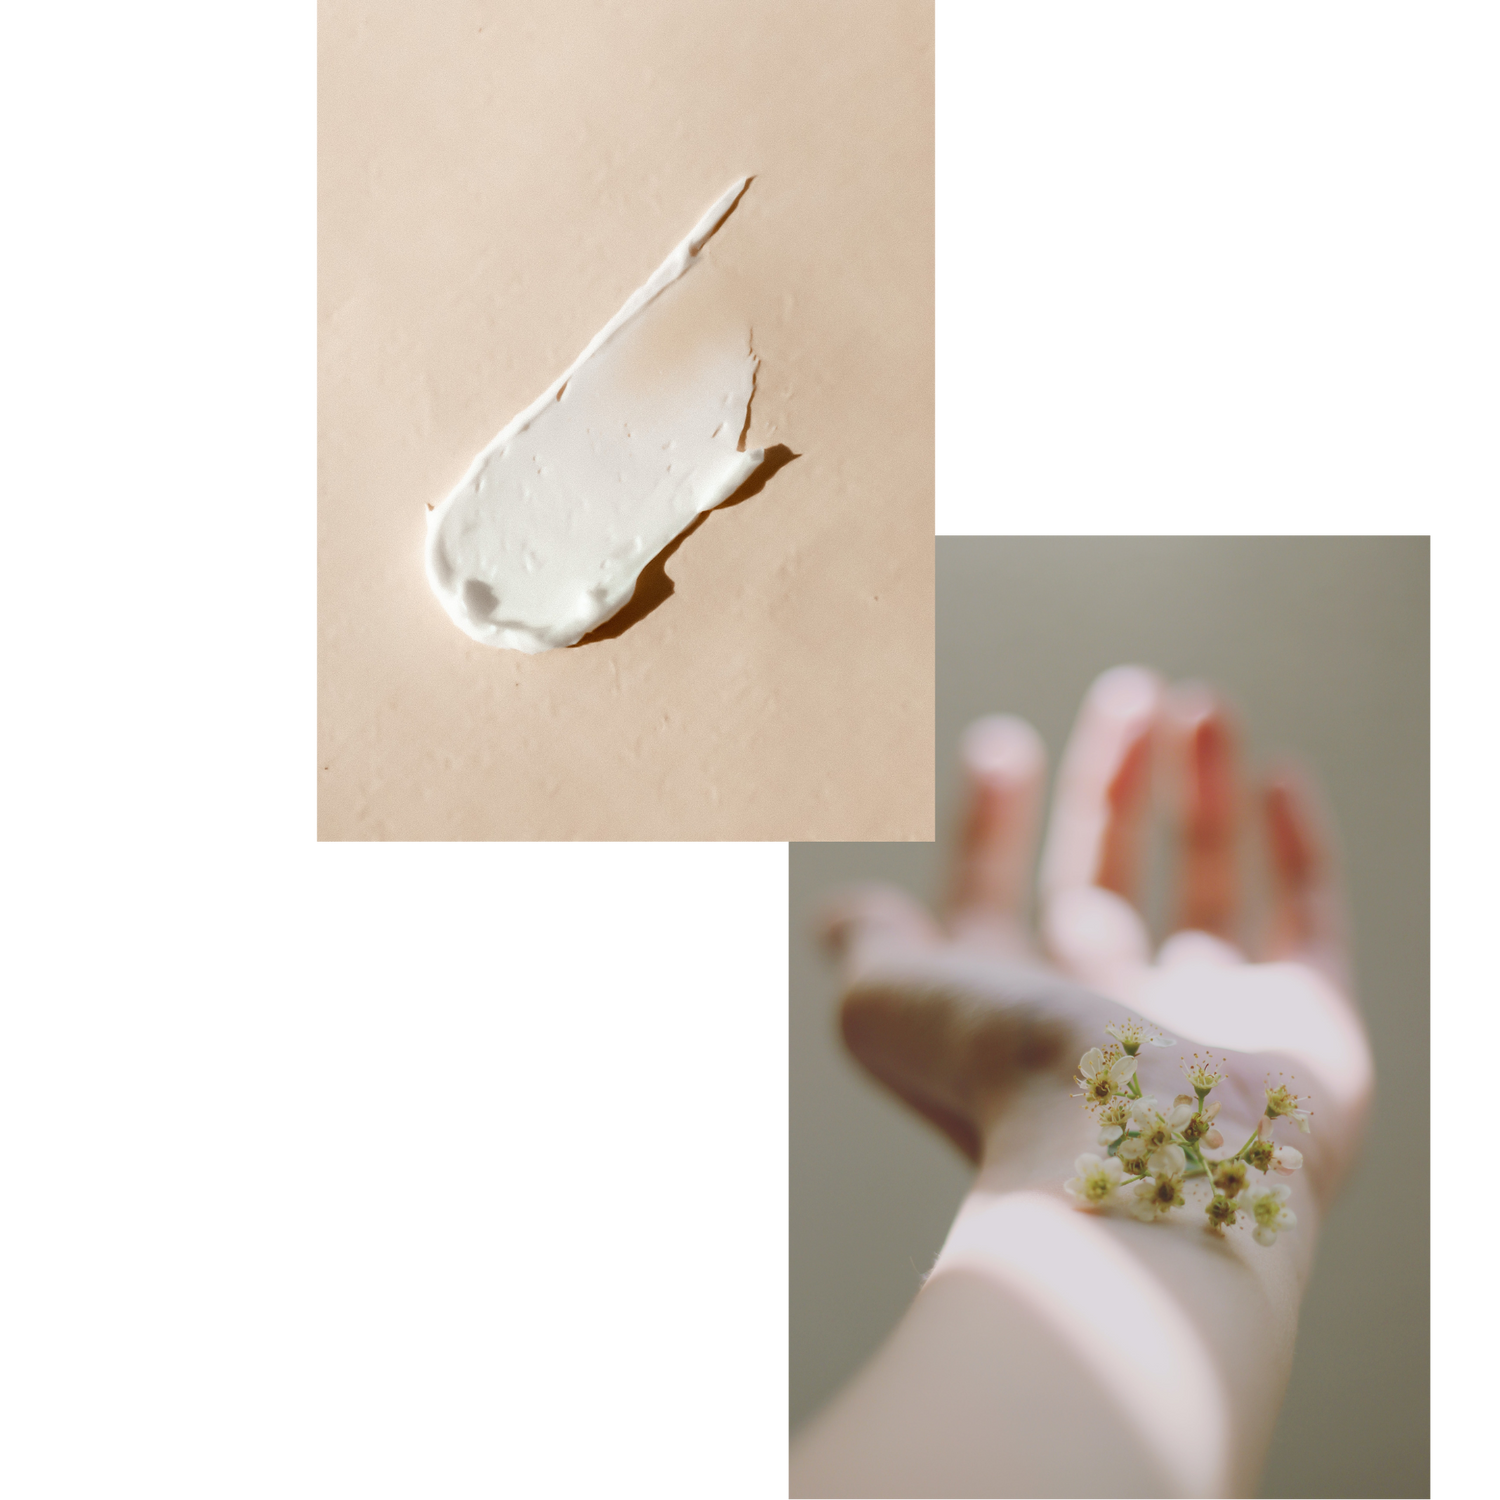 A collage of images: The first is a product spread our onto a beige background. The next is of a arm onto which a flower is placed.